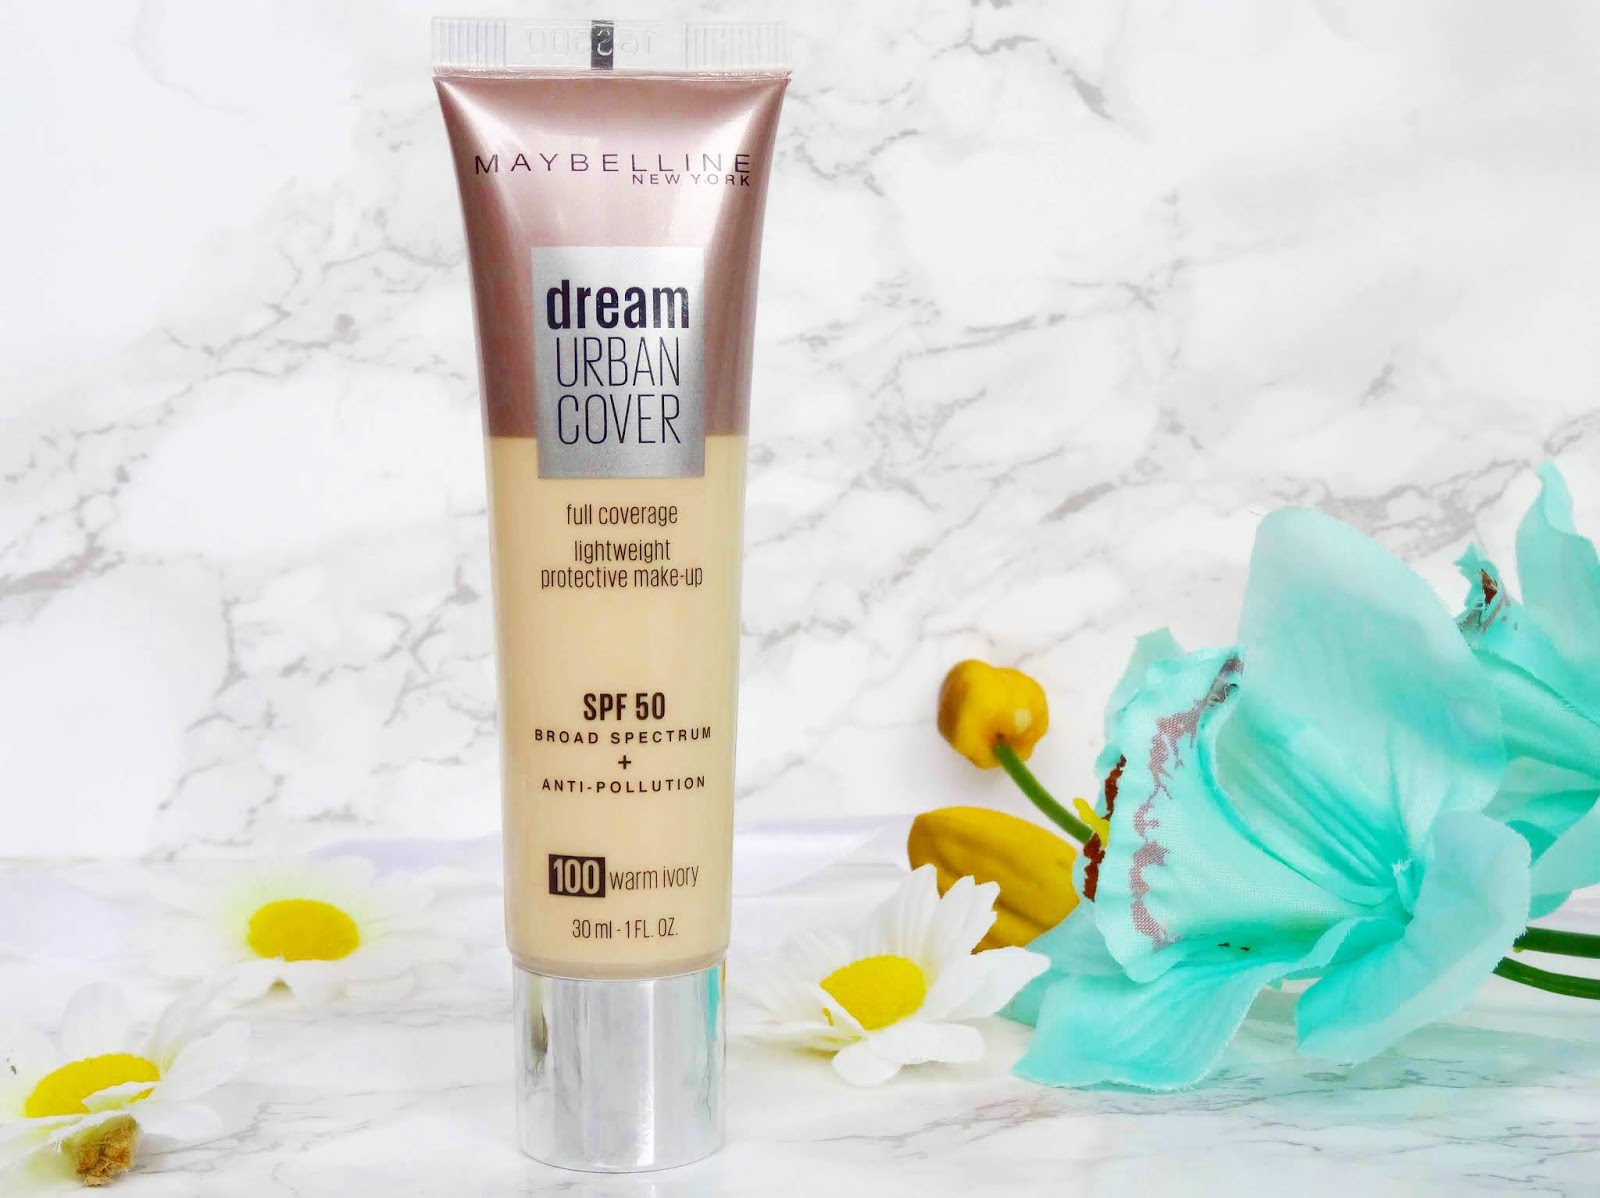 Maybelline Dream Urban Cover Foundation Review